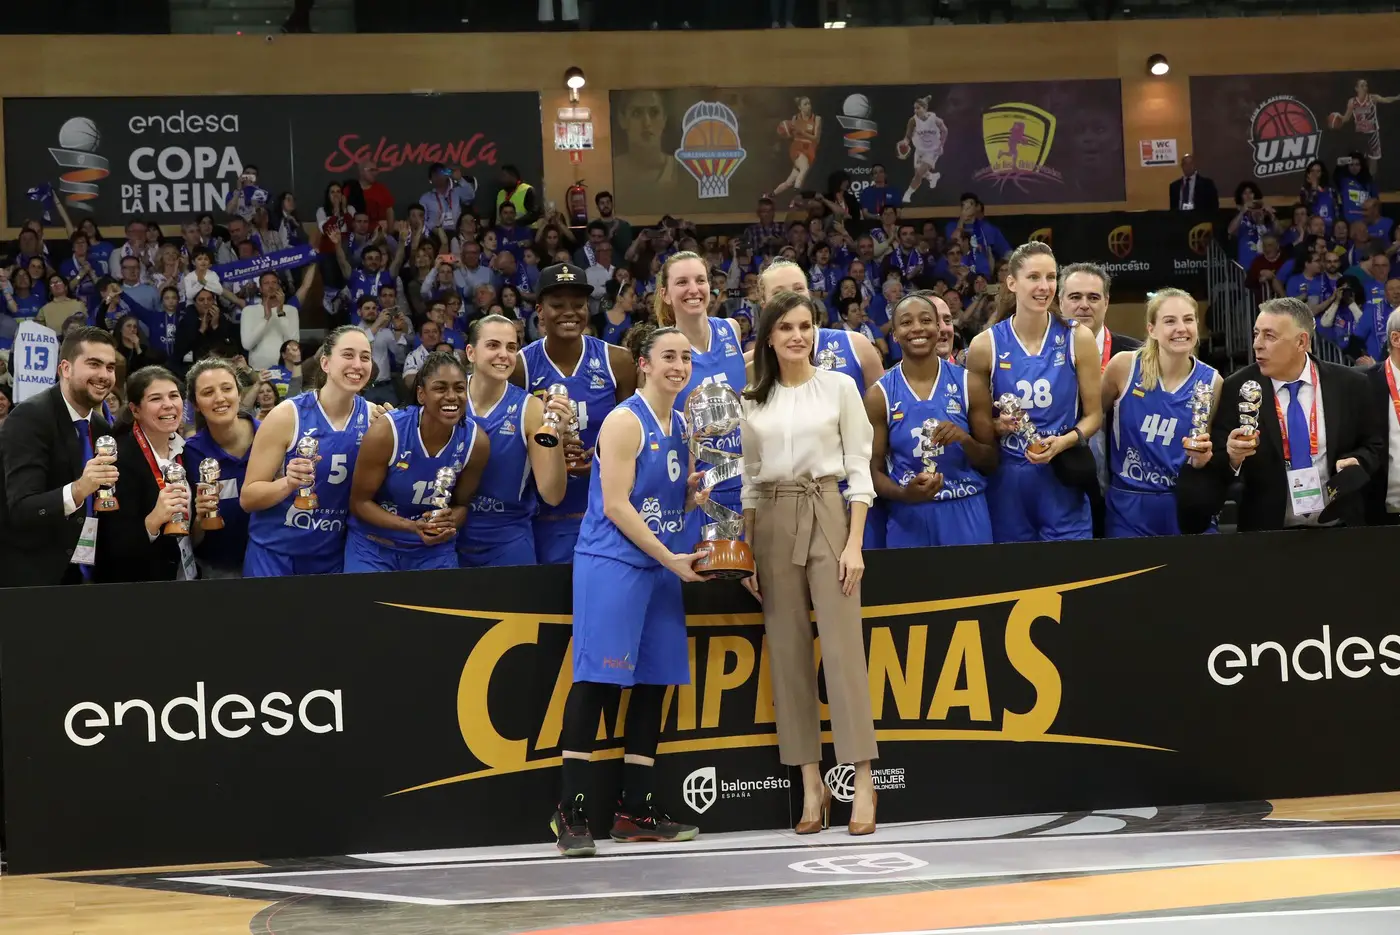 Queen Letizia presented the Basket Ball Cup trophy to the winning team.